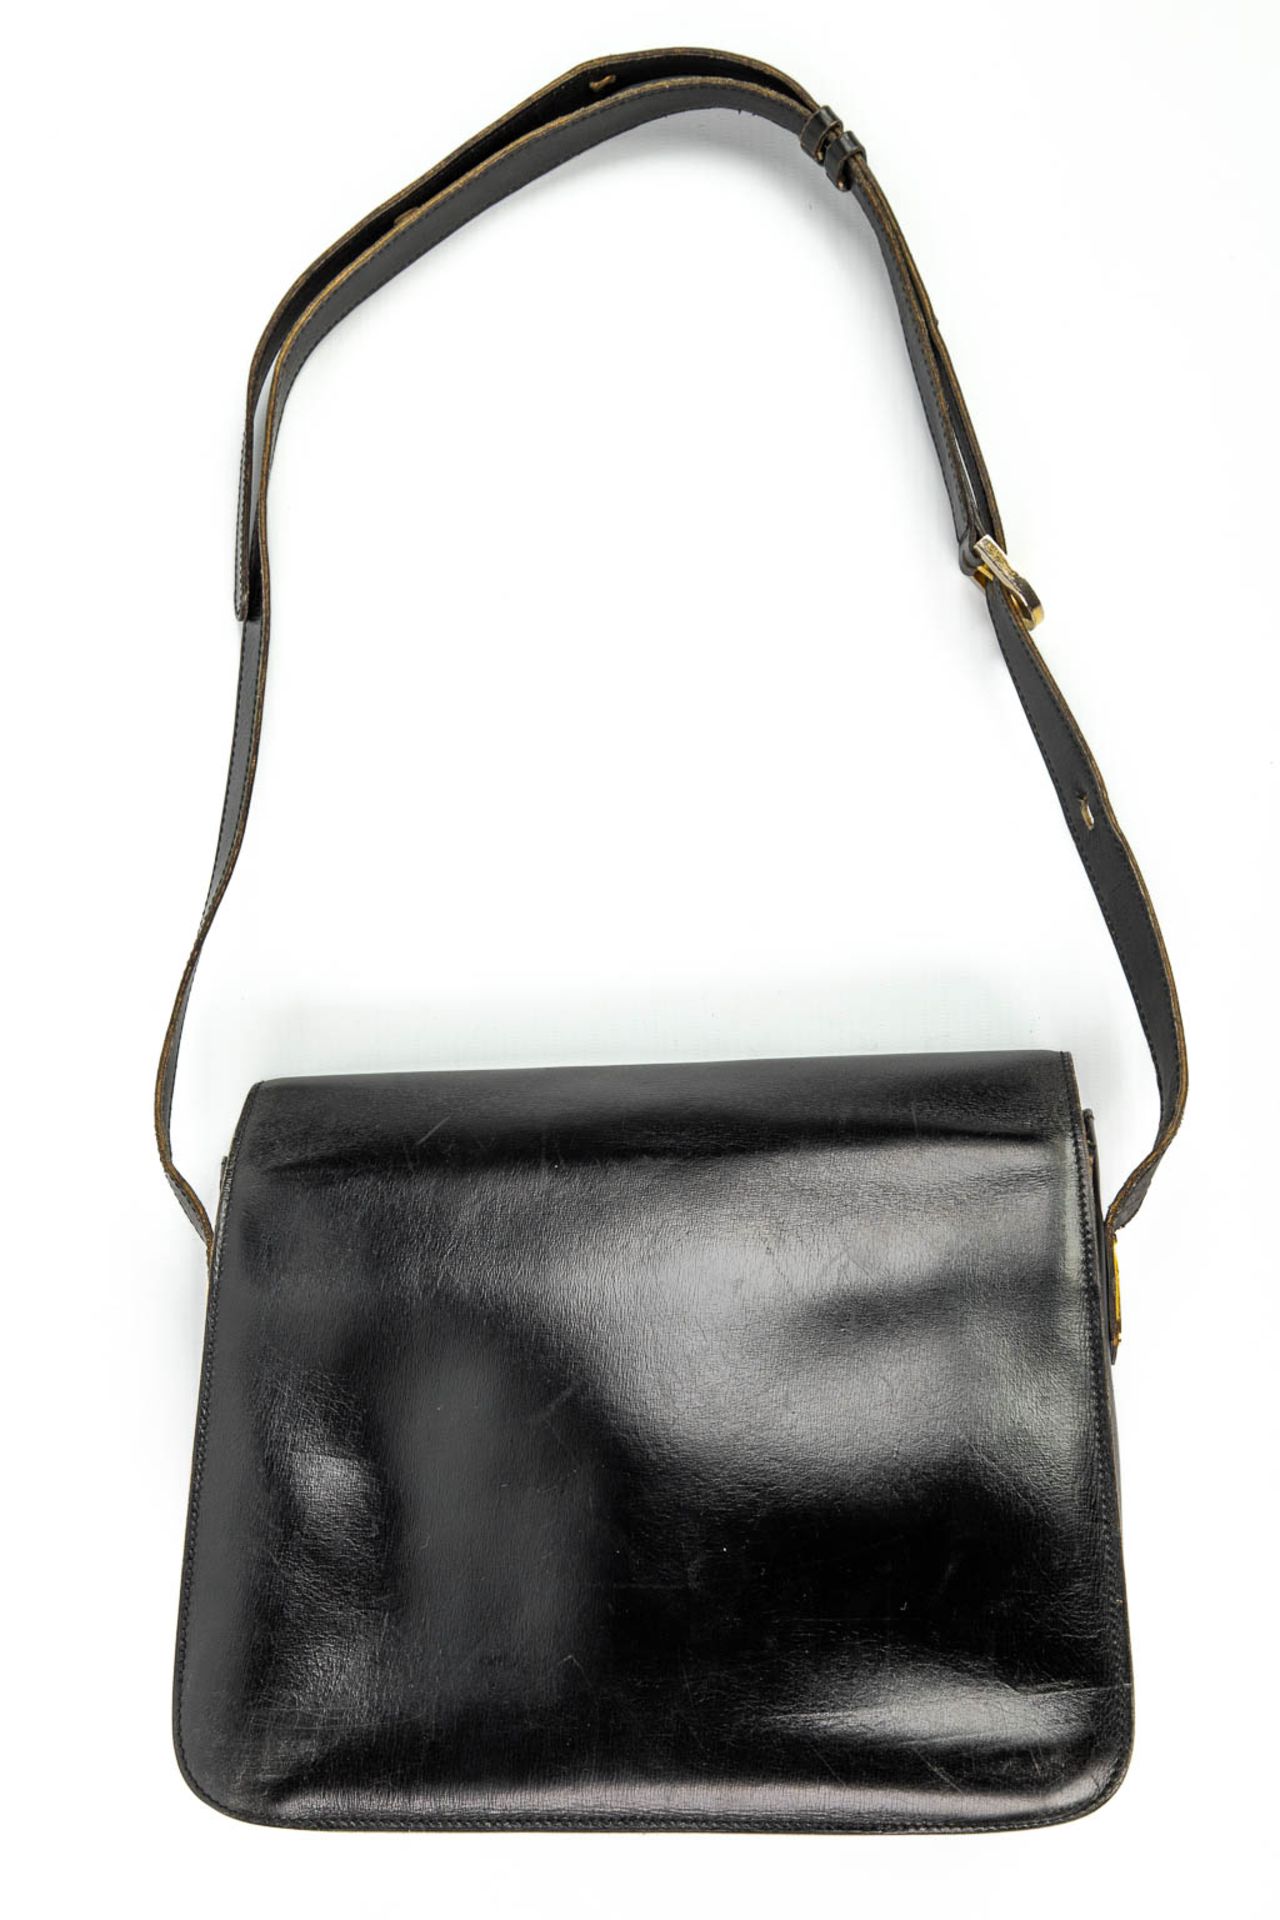 A purse made of black leather and marked Delvaux. (H:21cm) - Image 9 of 11